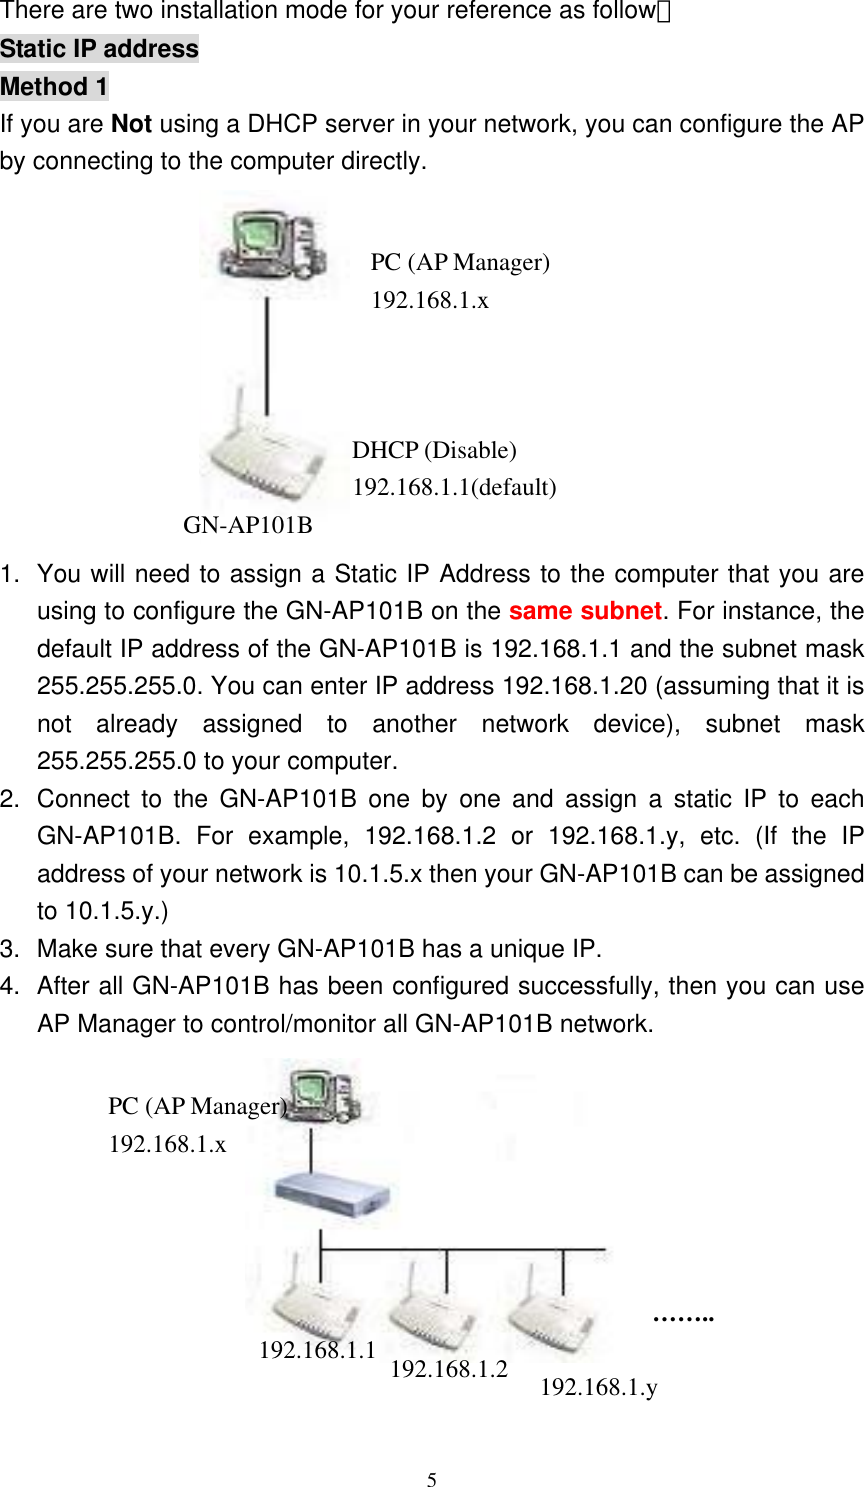 5  There are two installation mode for your reference as follow： Static IP address Method 1 If you are Not using a DHCP server in your network, you can configure the AP by connecting to the computer directly.  1. You will need to assign a Static IP Address to the computer that you are using to configure the GN-AP101B on the same subnet. For instance, the default IP address of the GN-AP101B is 192.168.1.1 and the subnet mask 255.255.255.0. You can enter IP address 192.168.1.20 (assuming that it is not already assigned to another network device), subnet mask 255.255.255.0 to your computer.     2.  Connect to the GN-AP101B one by one and assign a static IP to each GN-AP101B. For example, 192.168.1.2 or 192.168.1.y, etc. (If the IP address of your network is 10.1.5.x then your GN-AP101B can be assigned to 10.1.5.y.) 3.  Make sure that every GN-AP101B has a unique IP. 4.  After all GN-AP101B has been configured successfully, then you can use AP Manager to control/monitor all GN-AP101B network.   PC (AP Manager) 192.168.1.x DHCP (Disable) 192.168.1.1(default)GN-AP101B PC (AP Manager) 192.168.1.x 192.168.1.1  192.168.1.2  192.168.1.y …….. 